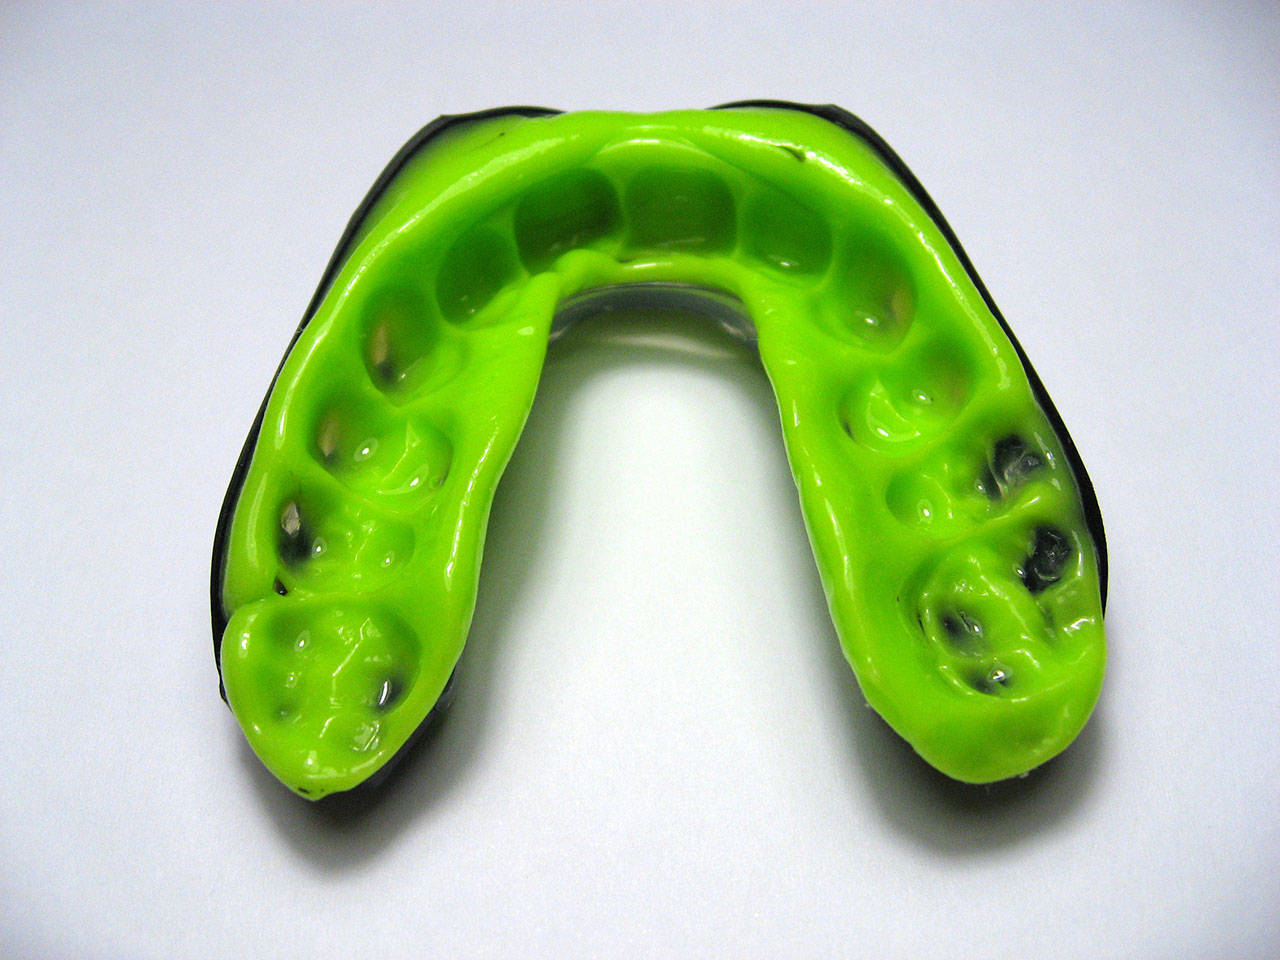 Use of a sports mouthguard can significantly reduce the incidence of dental injuries. Courtesy photo